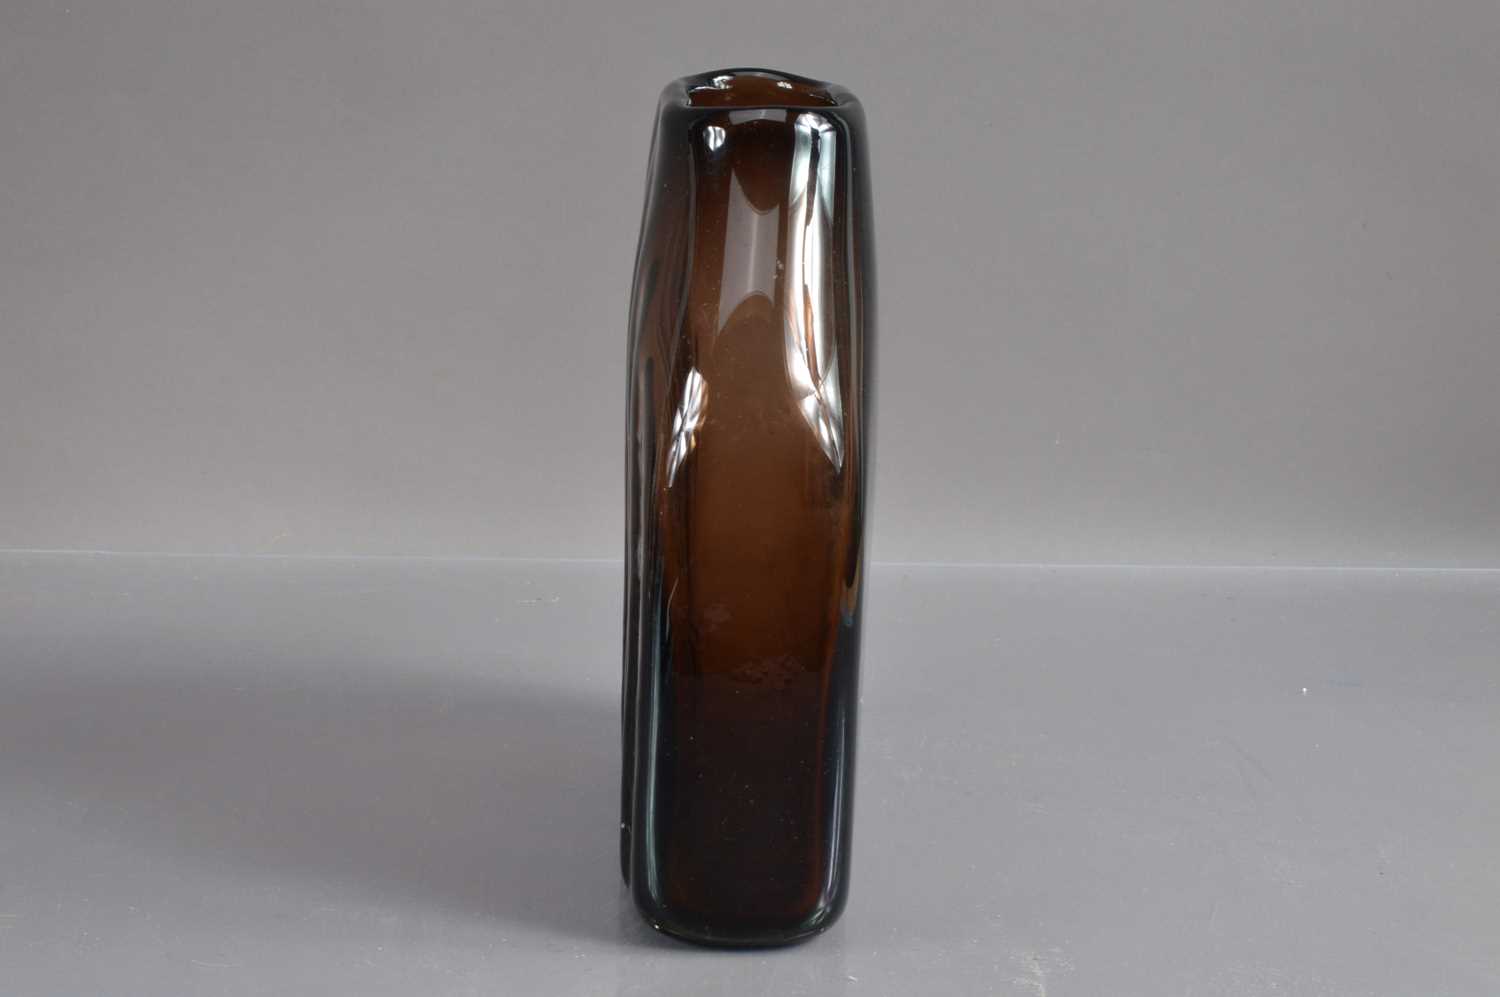 A Whitefriars shoulder vase in 'Cinnamon' colourway designed by Geoffrey Baxter (1922-1995), - Image 2 of 6